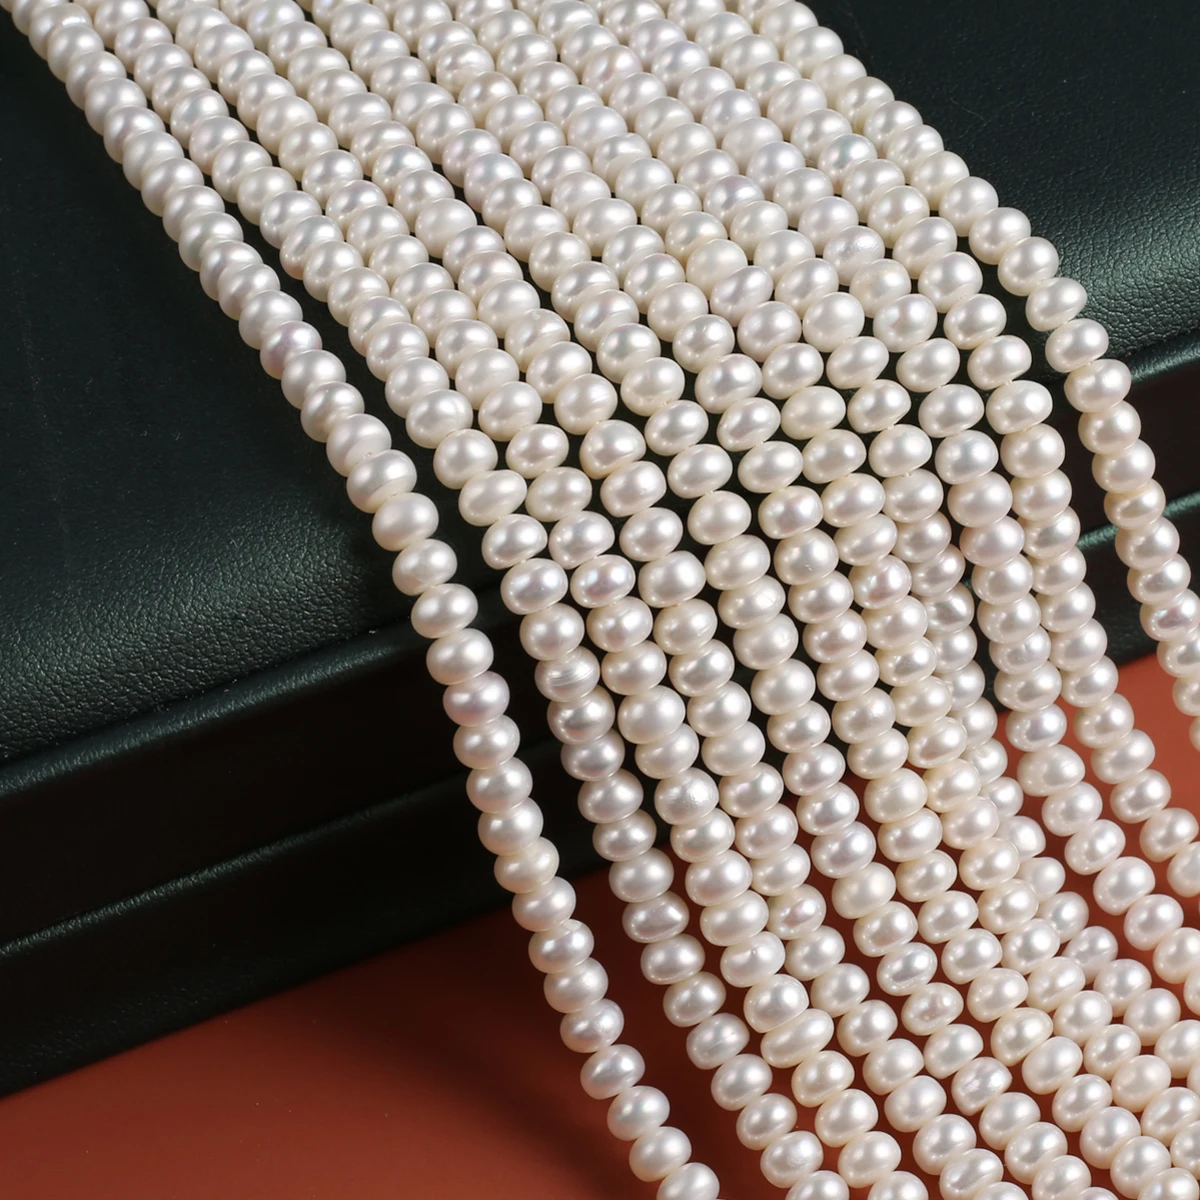 

Natural Pearl Squash Bead Exquisite Shape Elegant Appearance For DIY Jewelry Making Handmade Bracelet Necklace Length 36cm